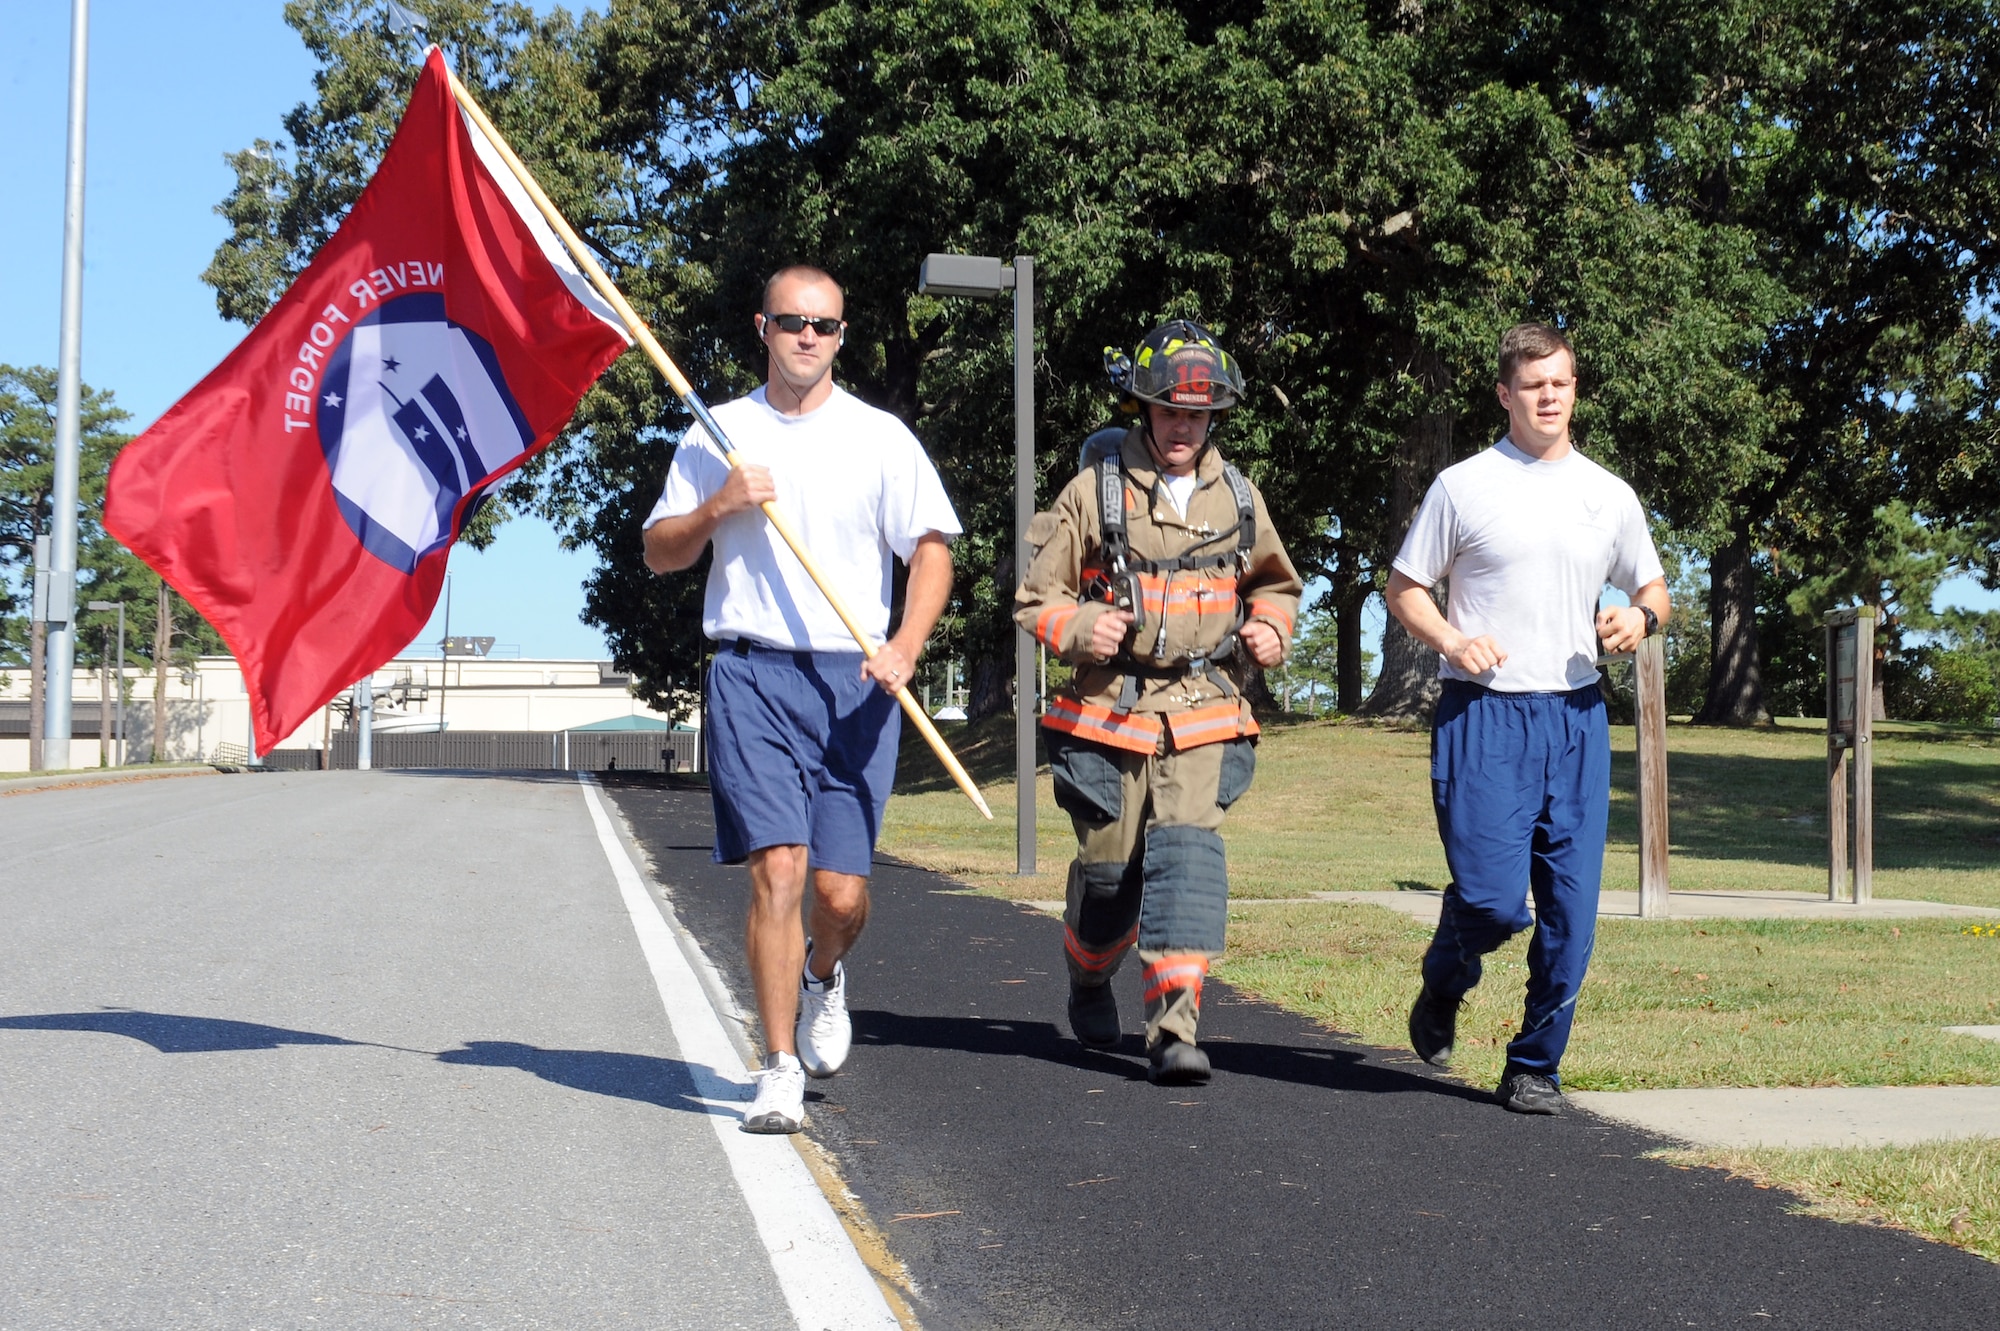 From left, U.S. Air Force Senior Airman Daniel Gough, 4th Civil Engineer Squadron fire inspector, Brent Collins, 4th CES fire captain, and Senior Airman Leland Soper, 4th Security Forces Squadron force protector, run around the 2-mile track on Seymour Johnson Air Force Base, N.C., Sept. 11, 2012. Seymour Johnson personnel performed a 24-hour run in honor of those killed in the 9/11 attacks. (U.S. Air Force photo/Airman 1st Class John Nieves Camacho/Released)